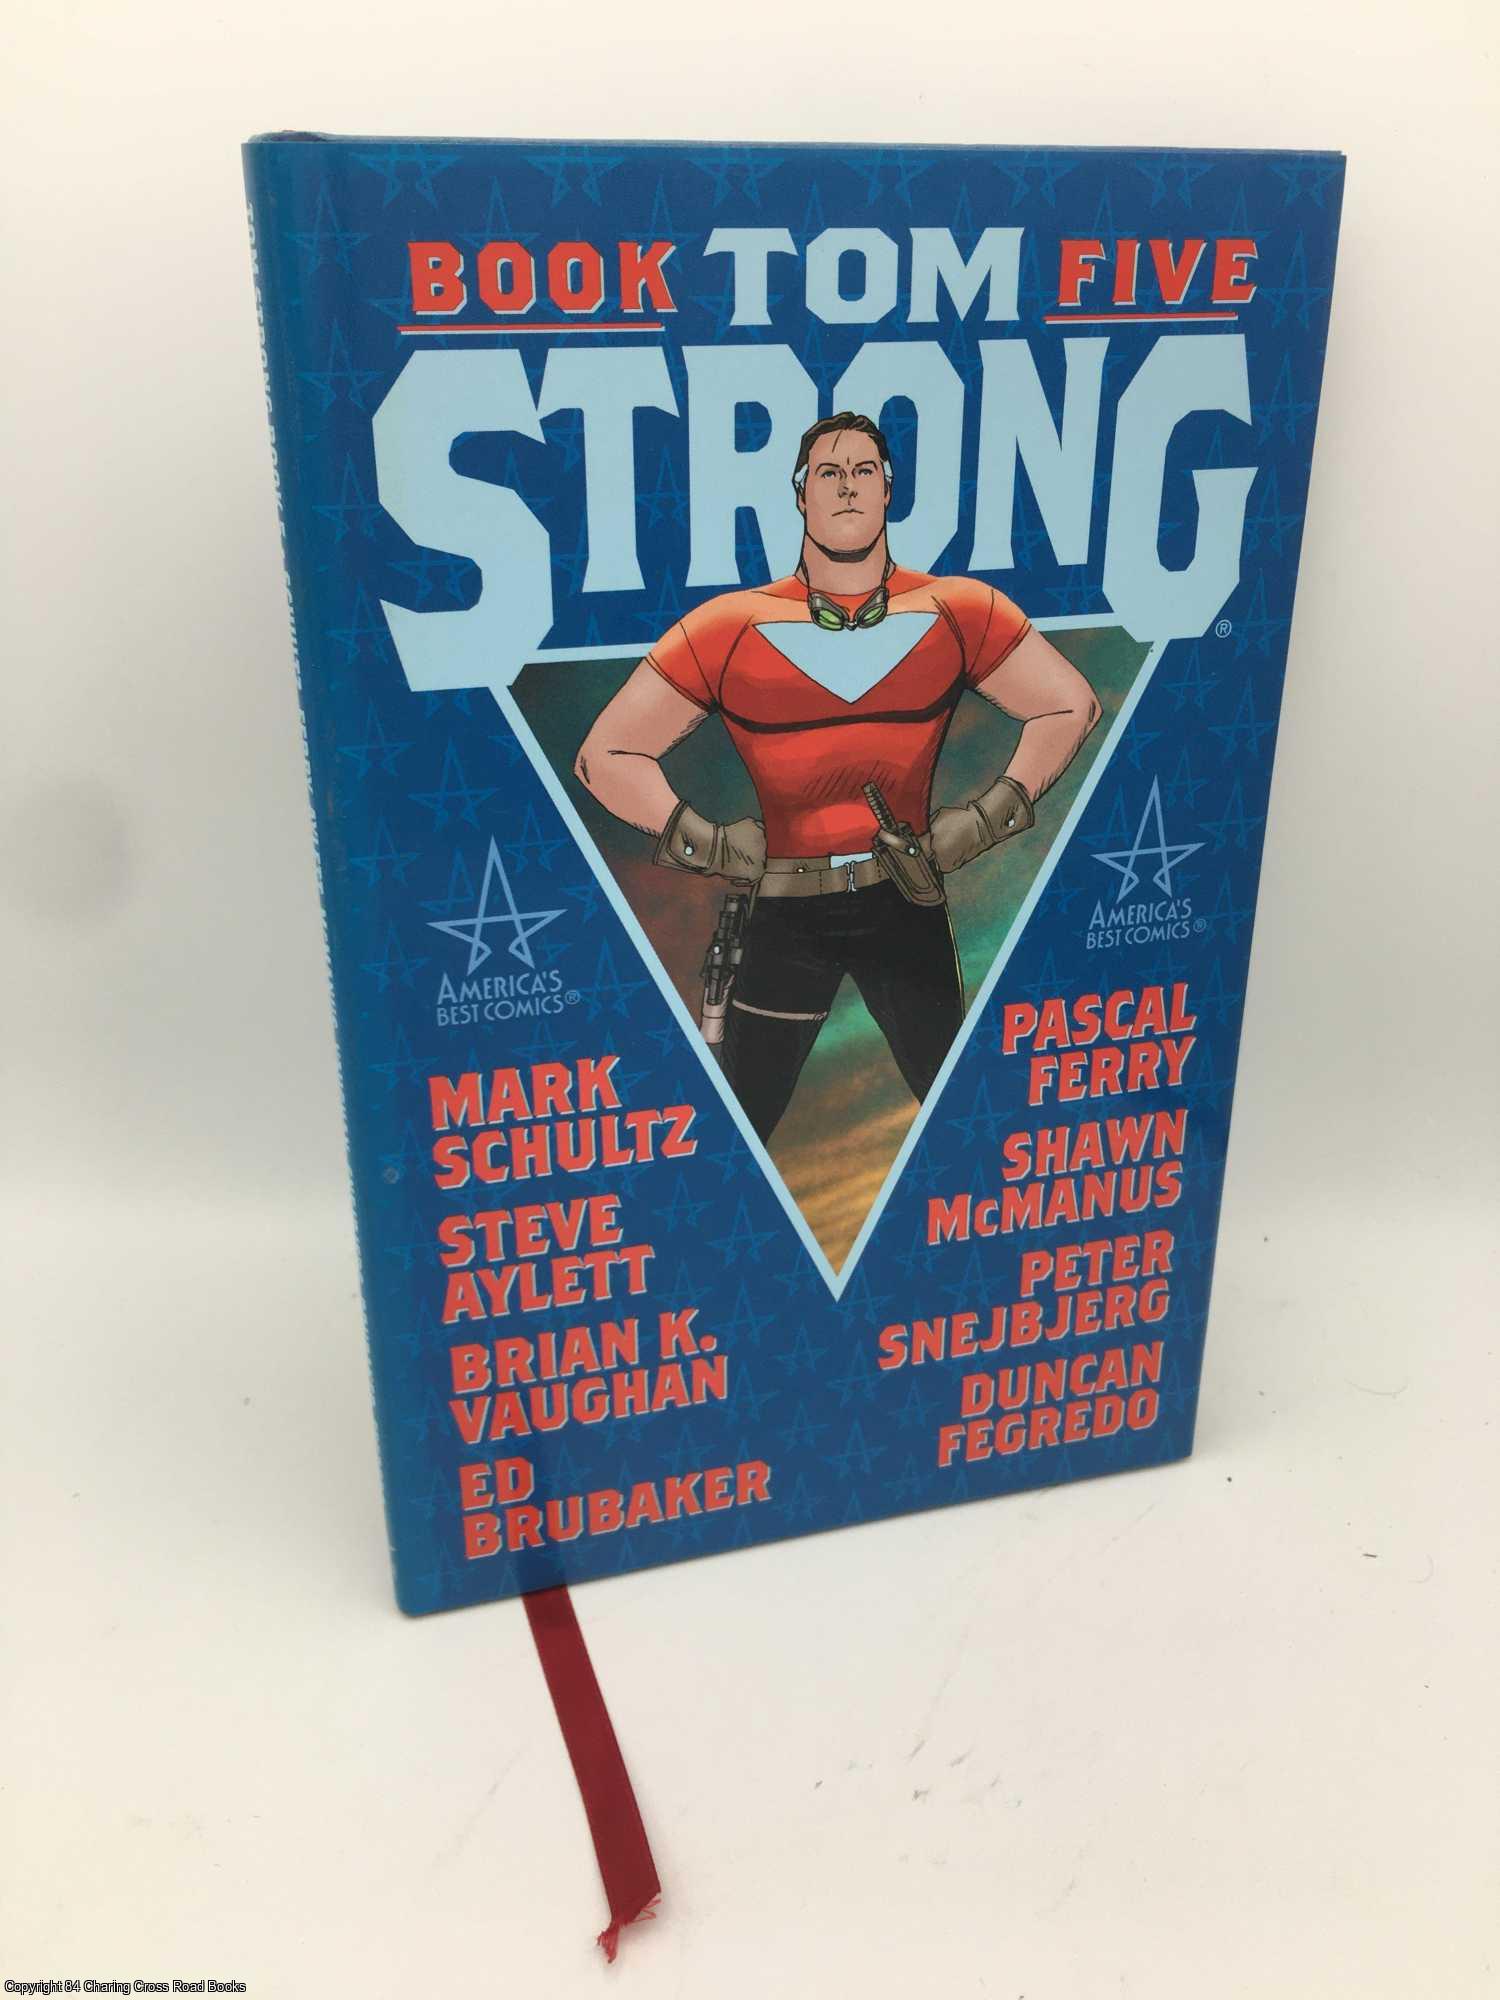 Brubaker, Ed - Tom Strong Book 5 Collected Edition